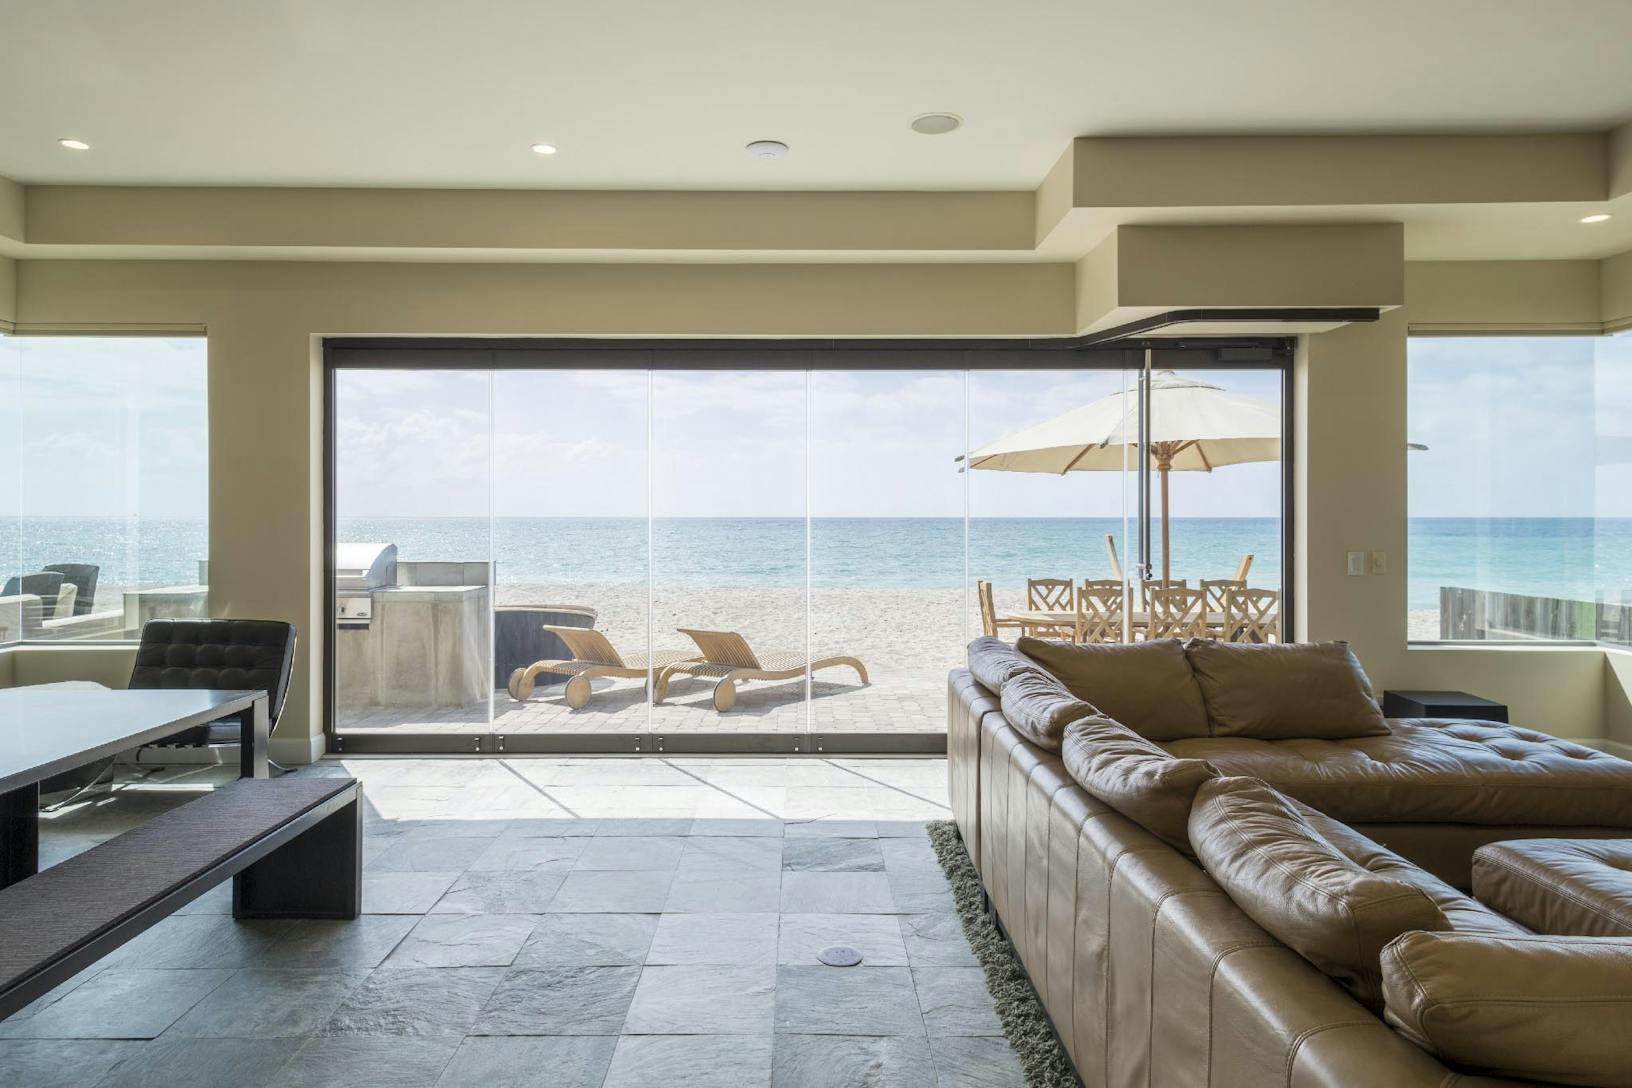 ClimaCLEAR beach house with all glass walls - Closed interior day view